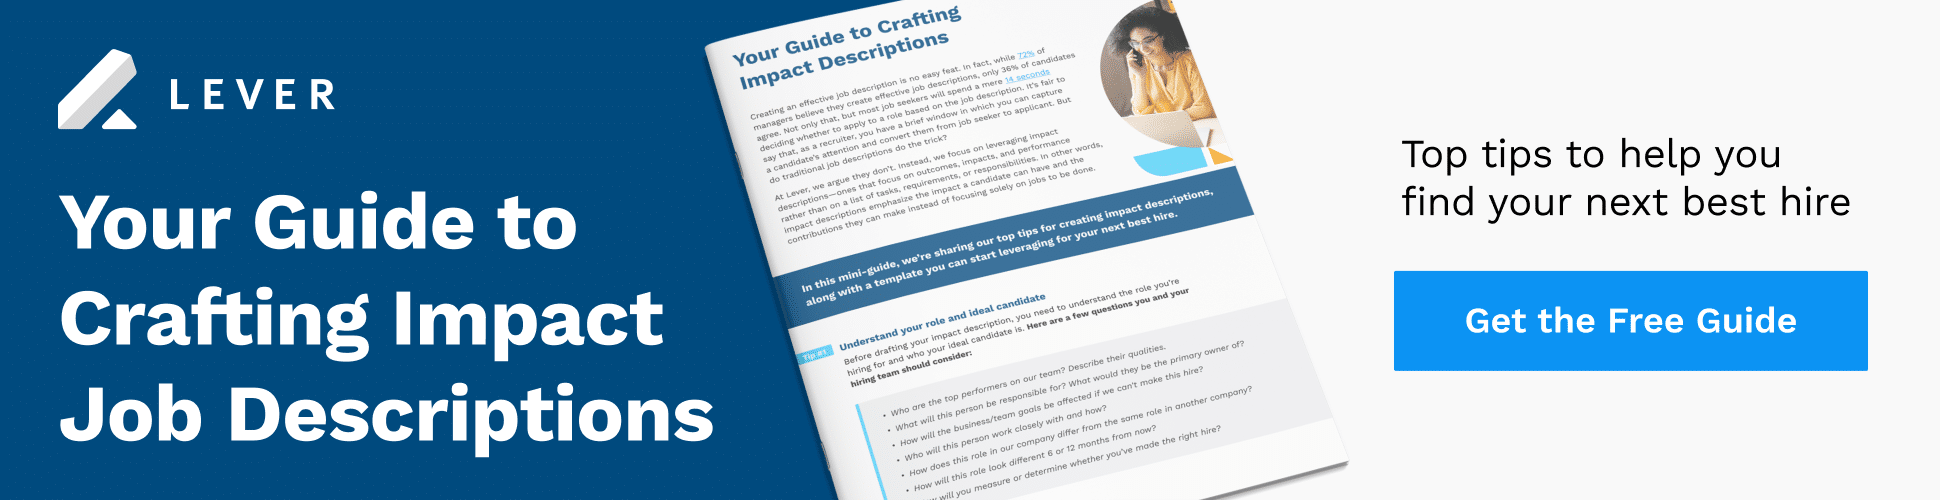 Your Guide to Crafting Impact Job Descriptions Guide